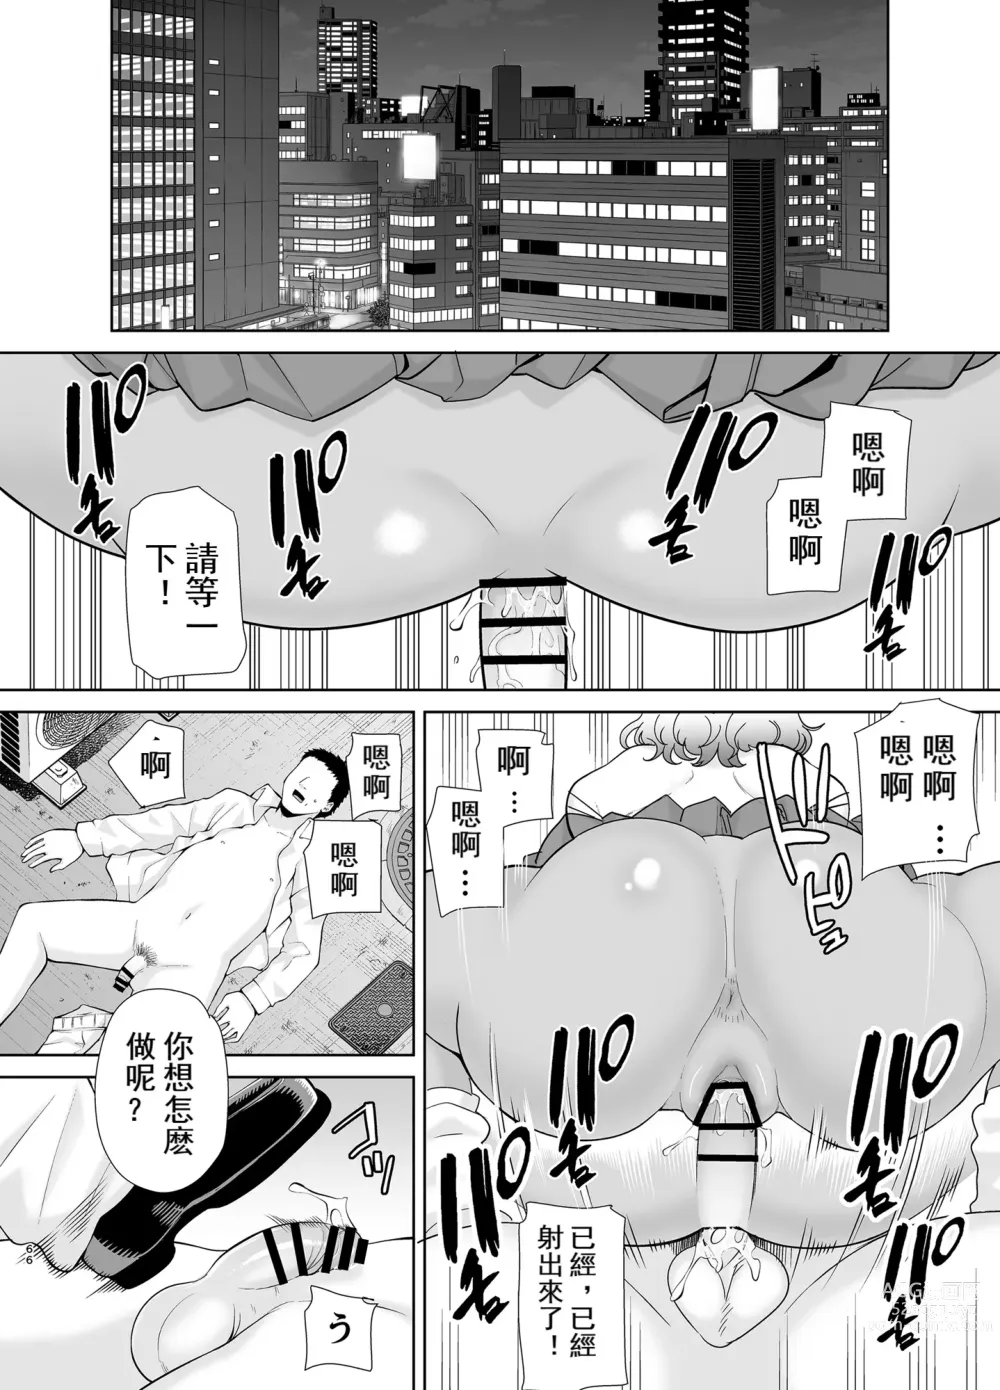 Page 271 of doujinshi 聖華女学院高等部公認竿おじさん 1-6